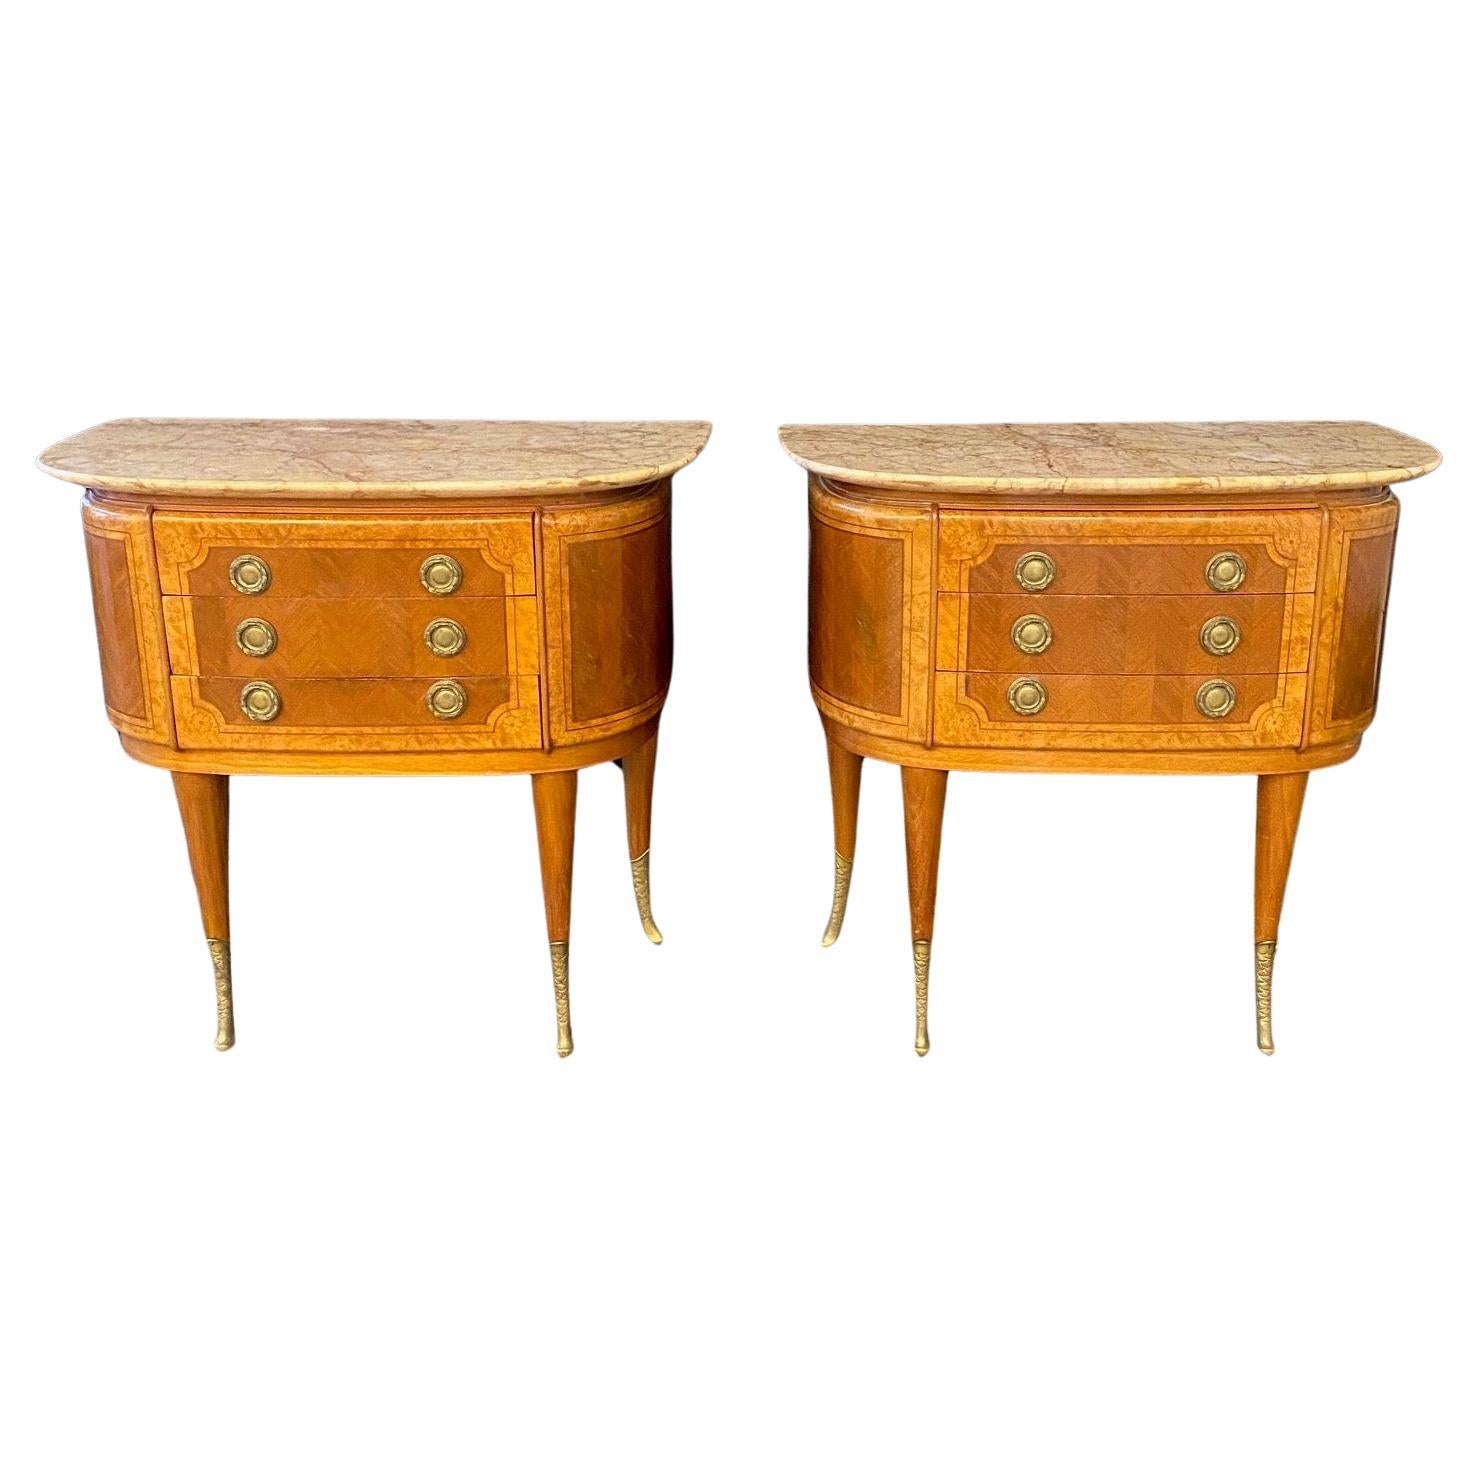 Pair of French Petite Inlaid Neoclassical Walnut Demilune Commodes Night Stands For Sale